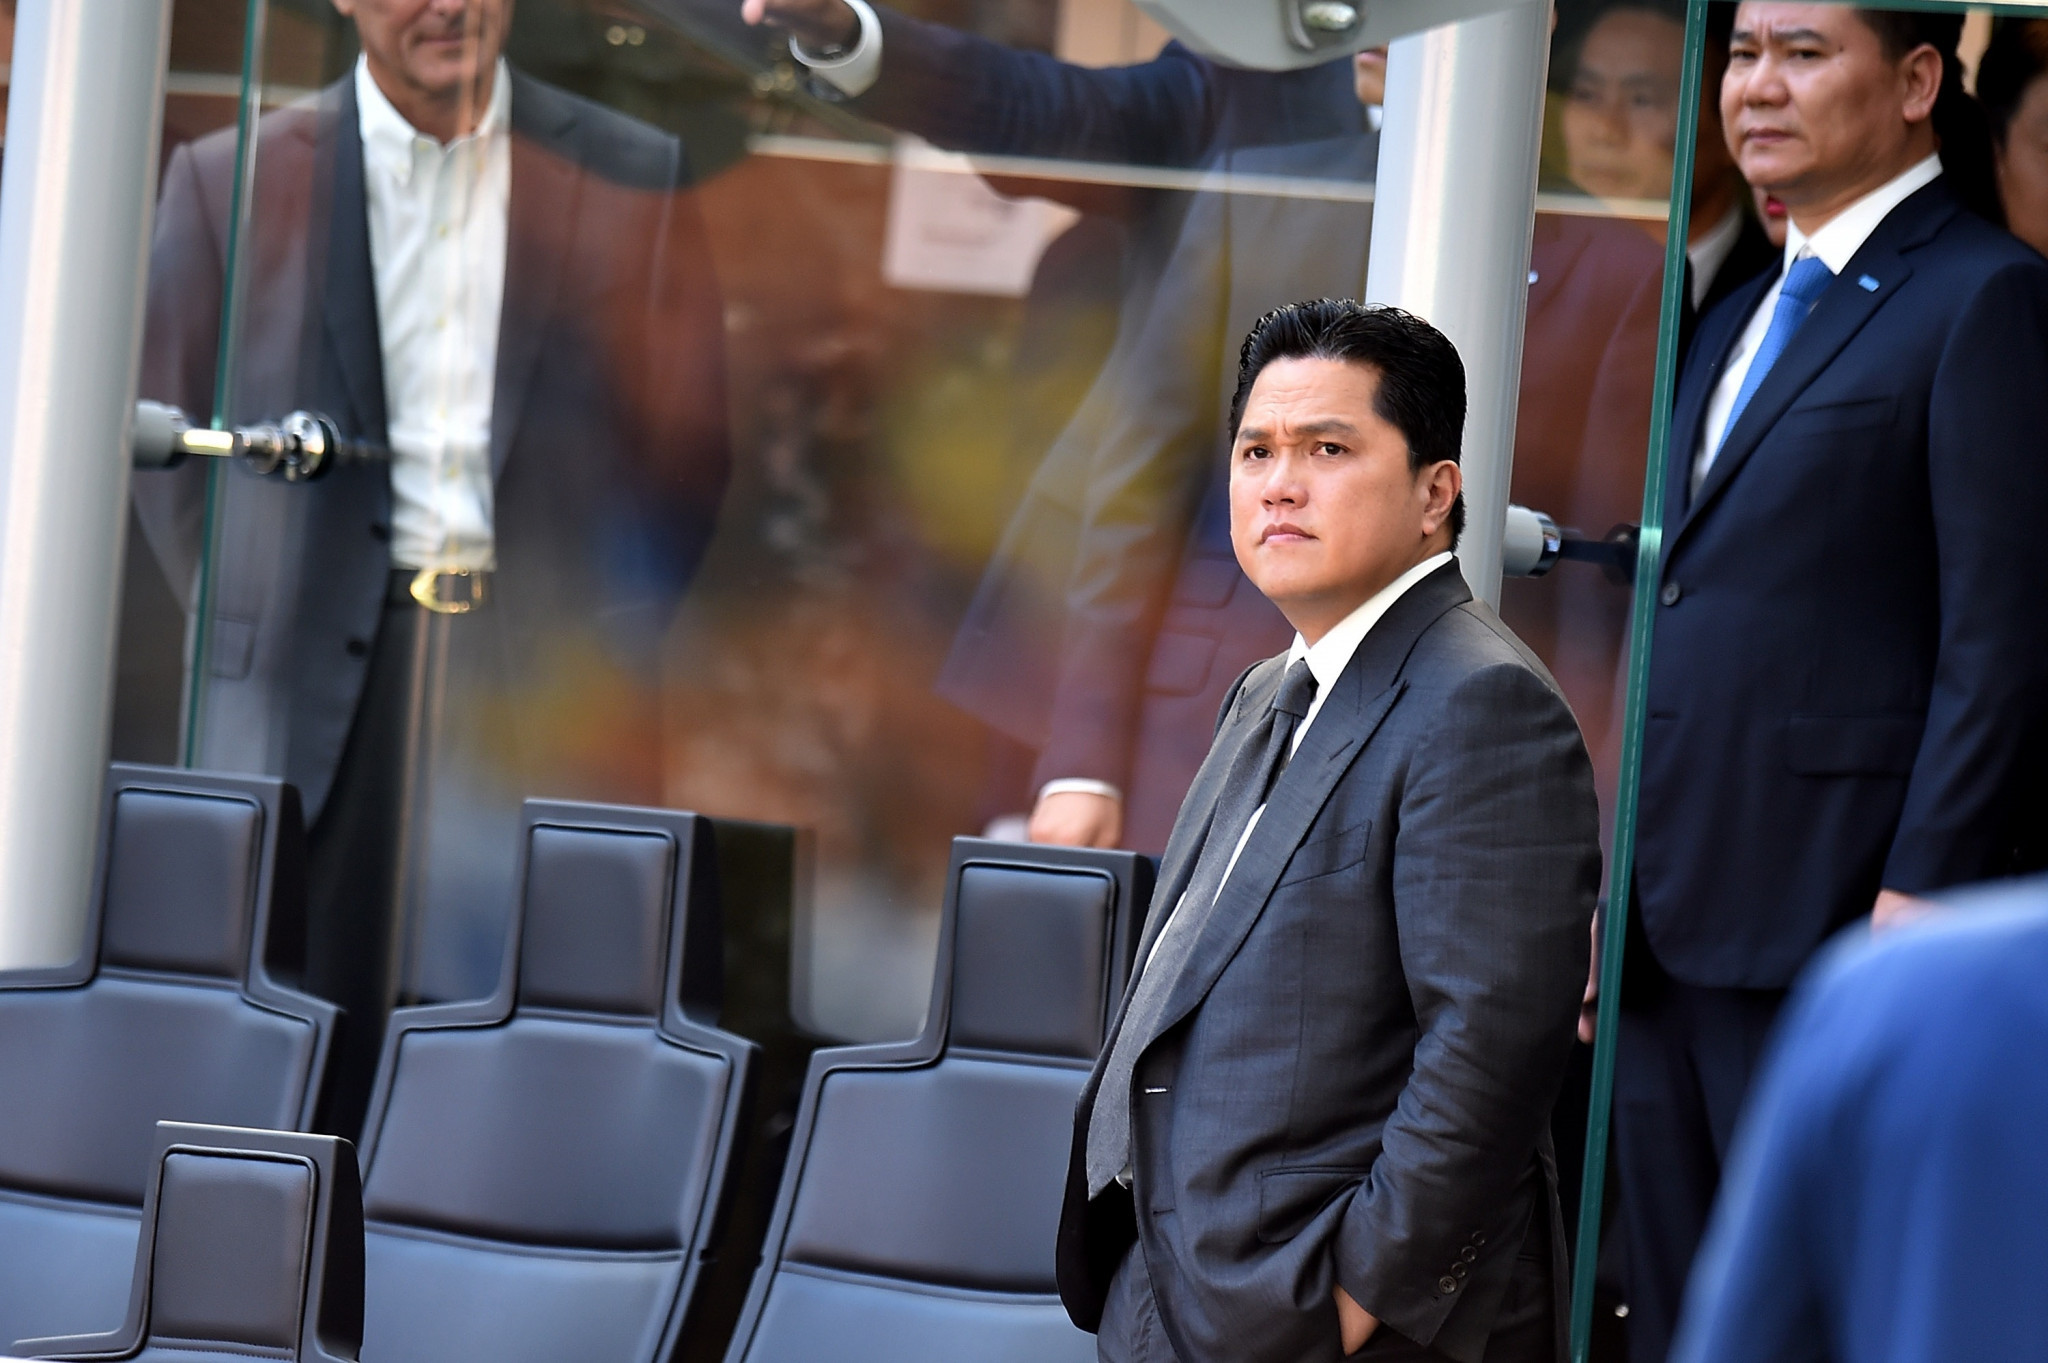 Indonesian Football Association President Erick Thohir said his country was still interested in staging the FIFA World Cup after ruling itself out of the race for 2034 ©Getty Images